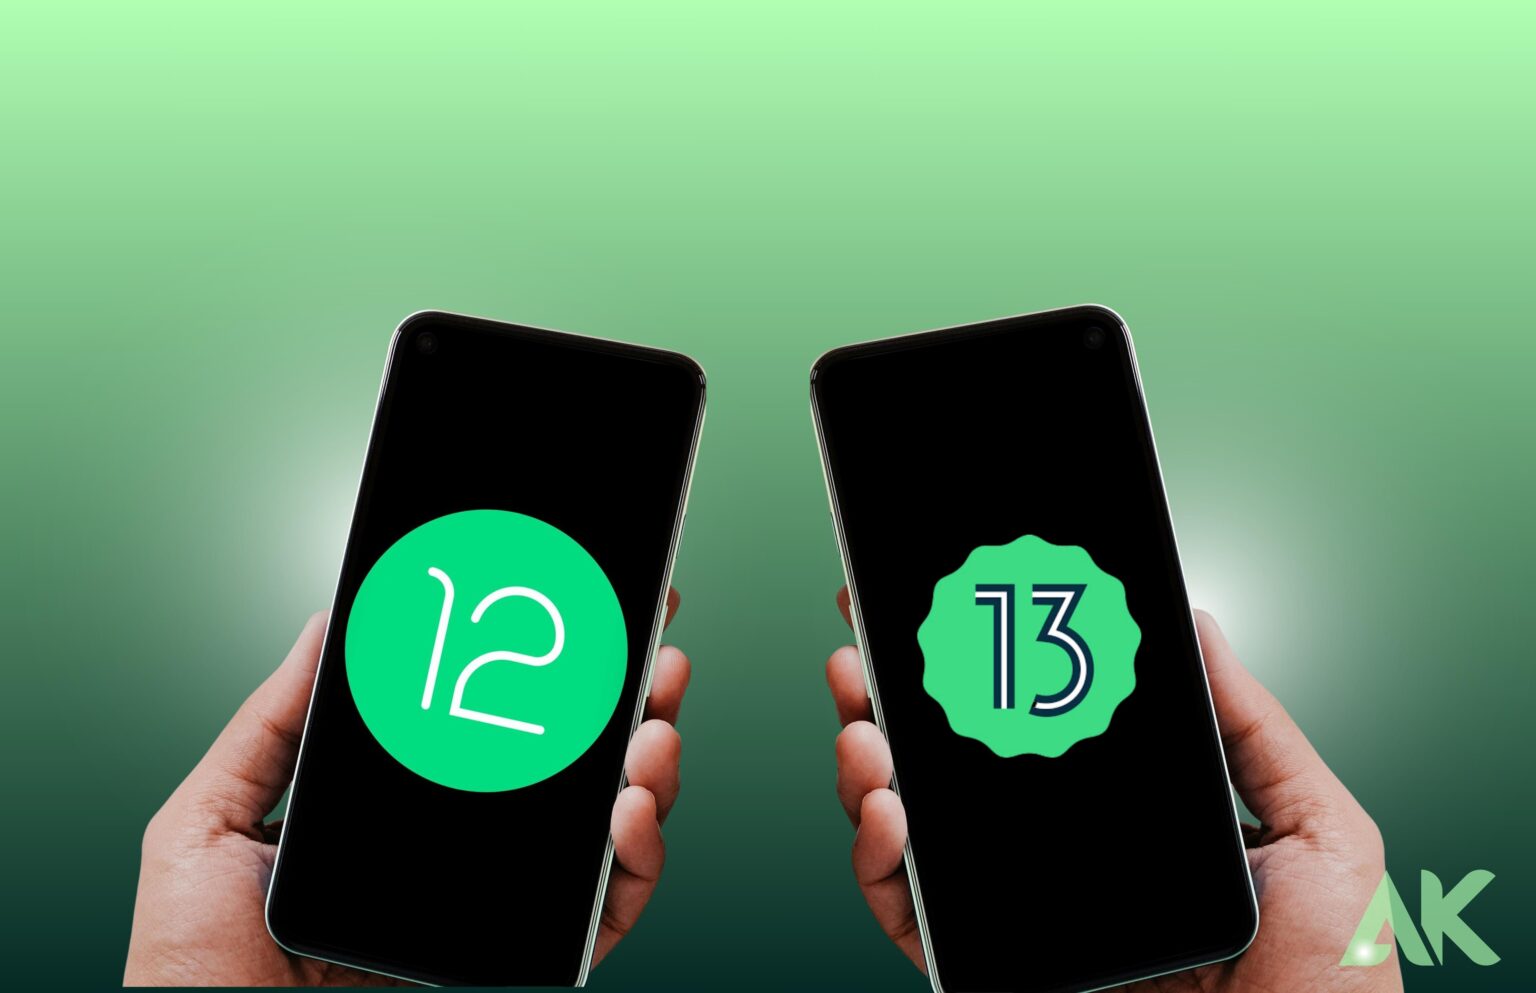 Android 13 vs. Older Versions: A Side-by-Side Comparison